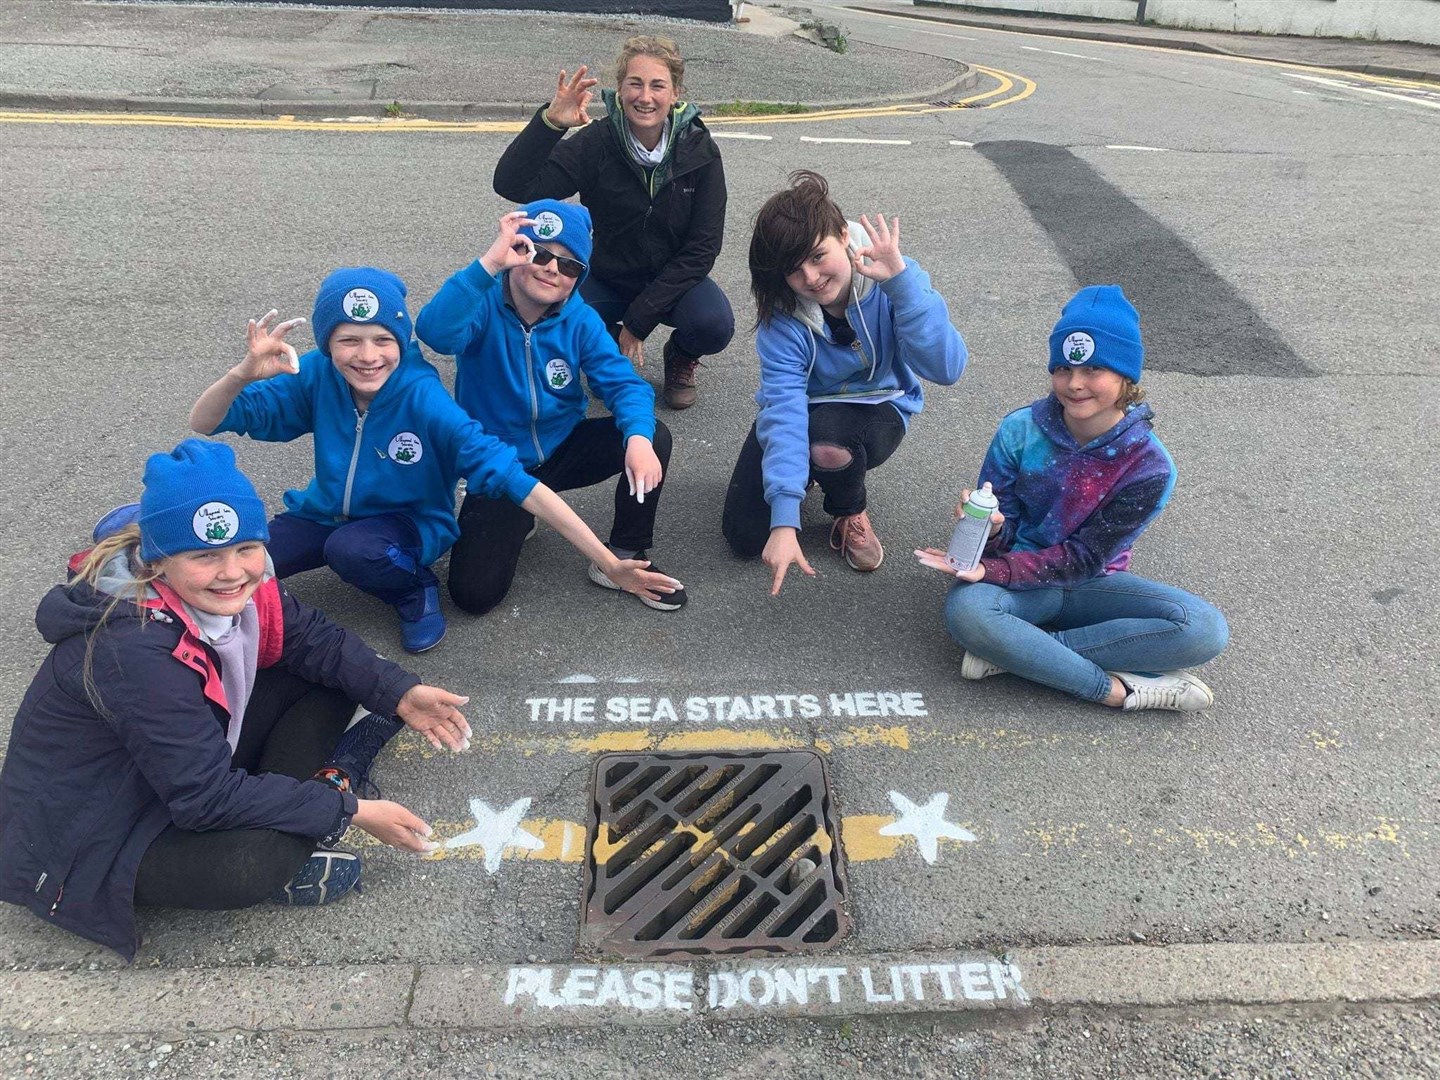 The message from the Ullapool Sea Savers is clear over litter like cigarette butts being thrown or swept down drains. Picture: Ullapool Sea Savers.